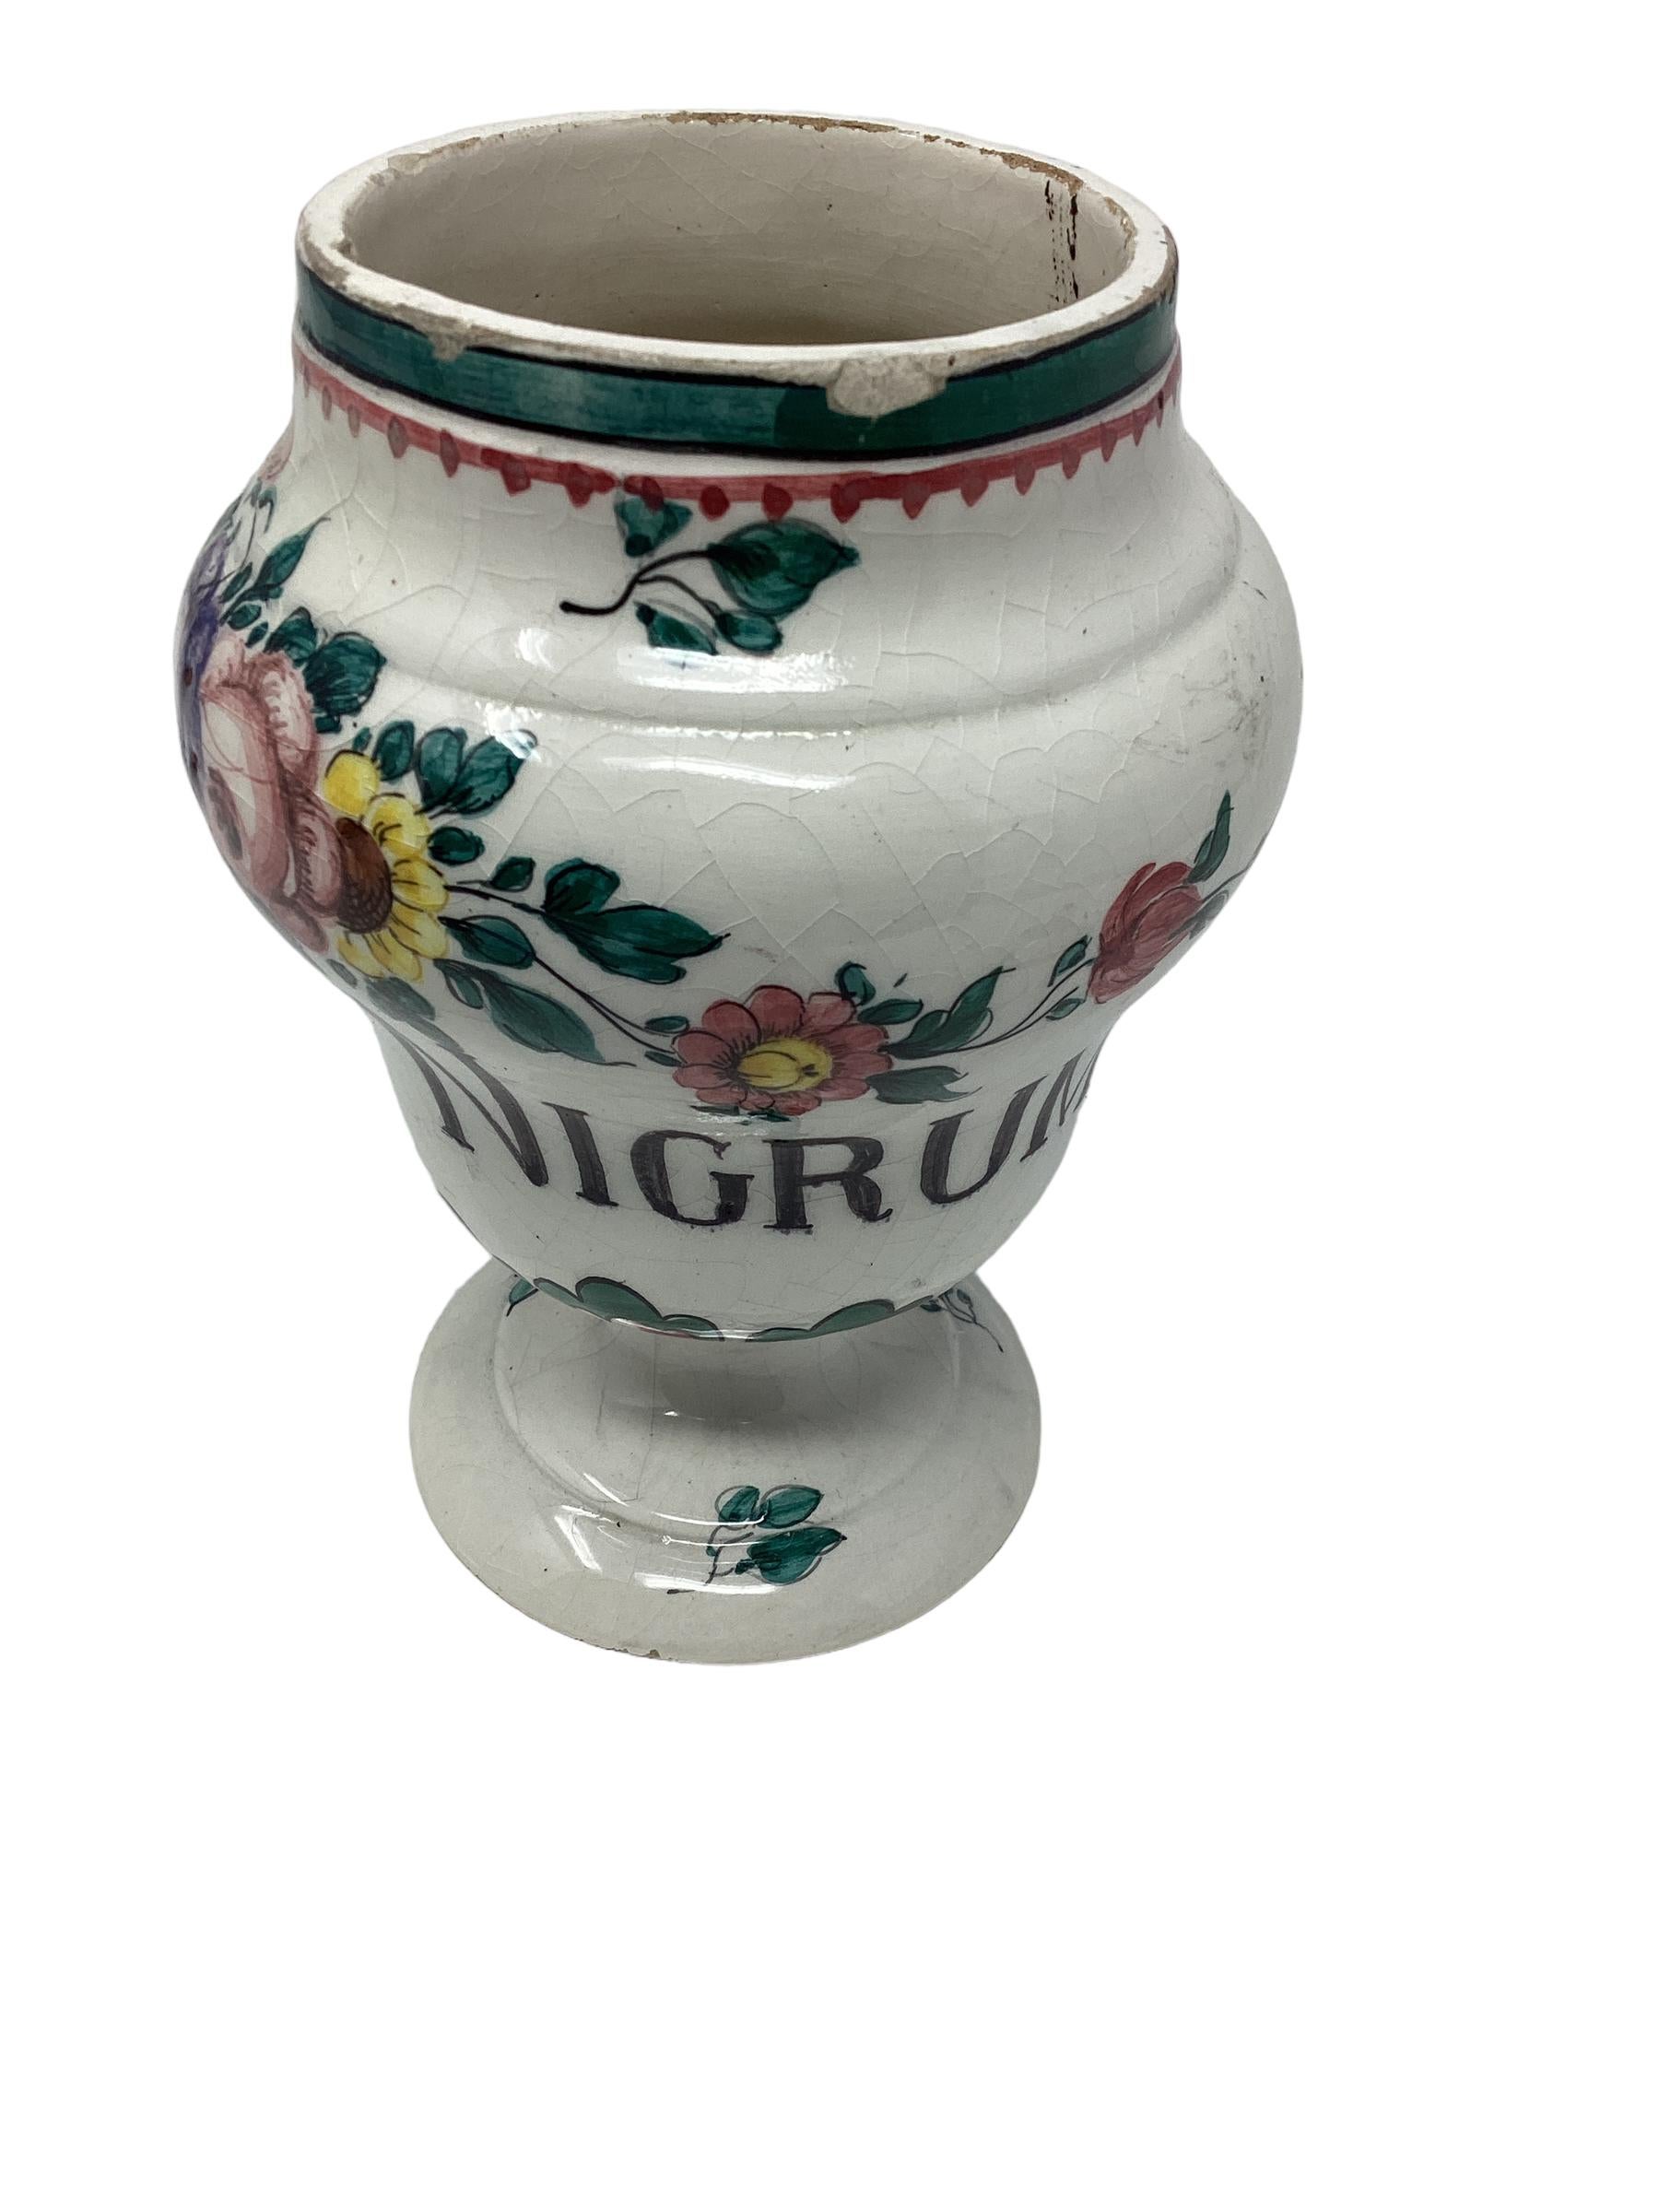 19th Century Italian Faience Floral Decorated Apothecary Jars For Sale 5